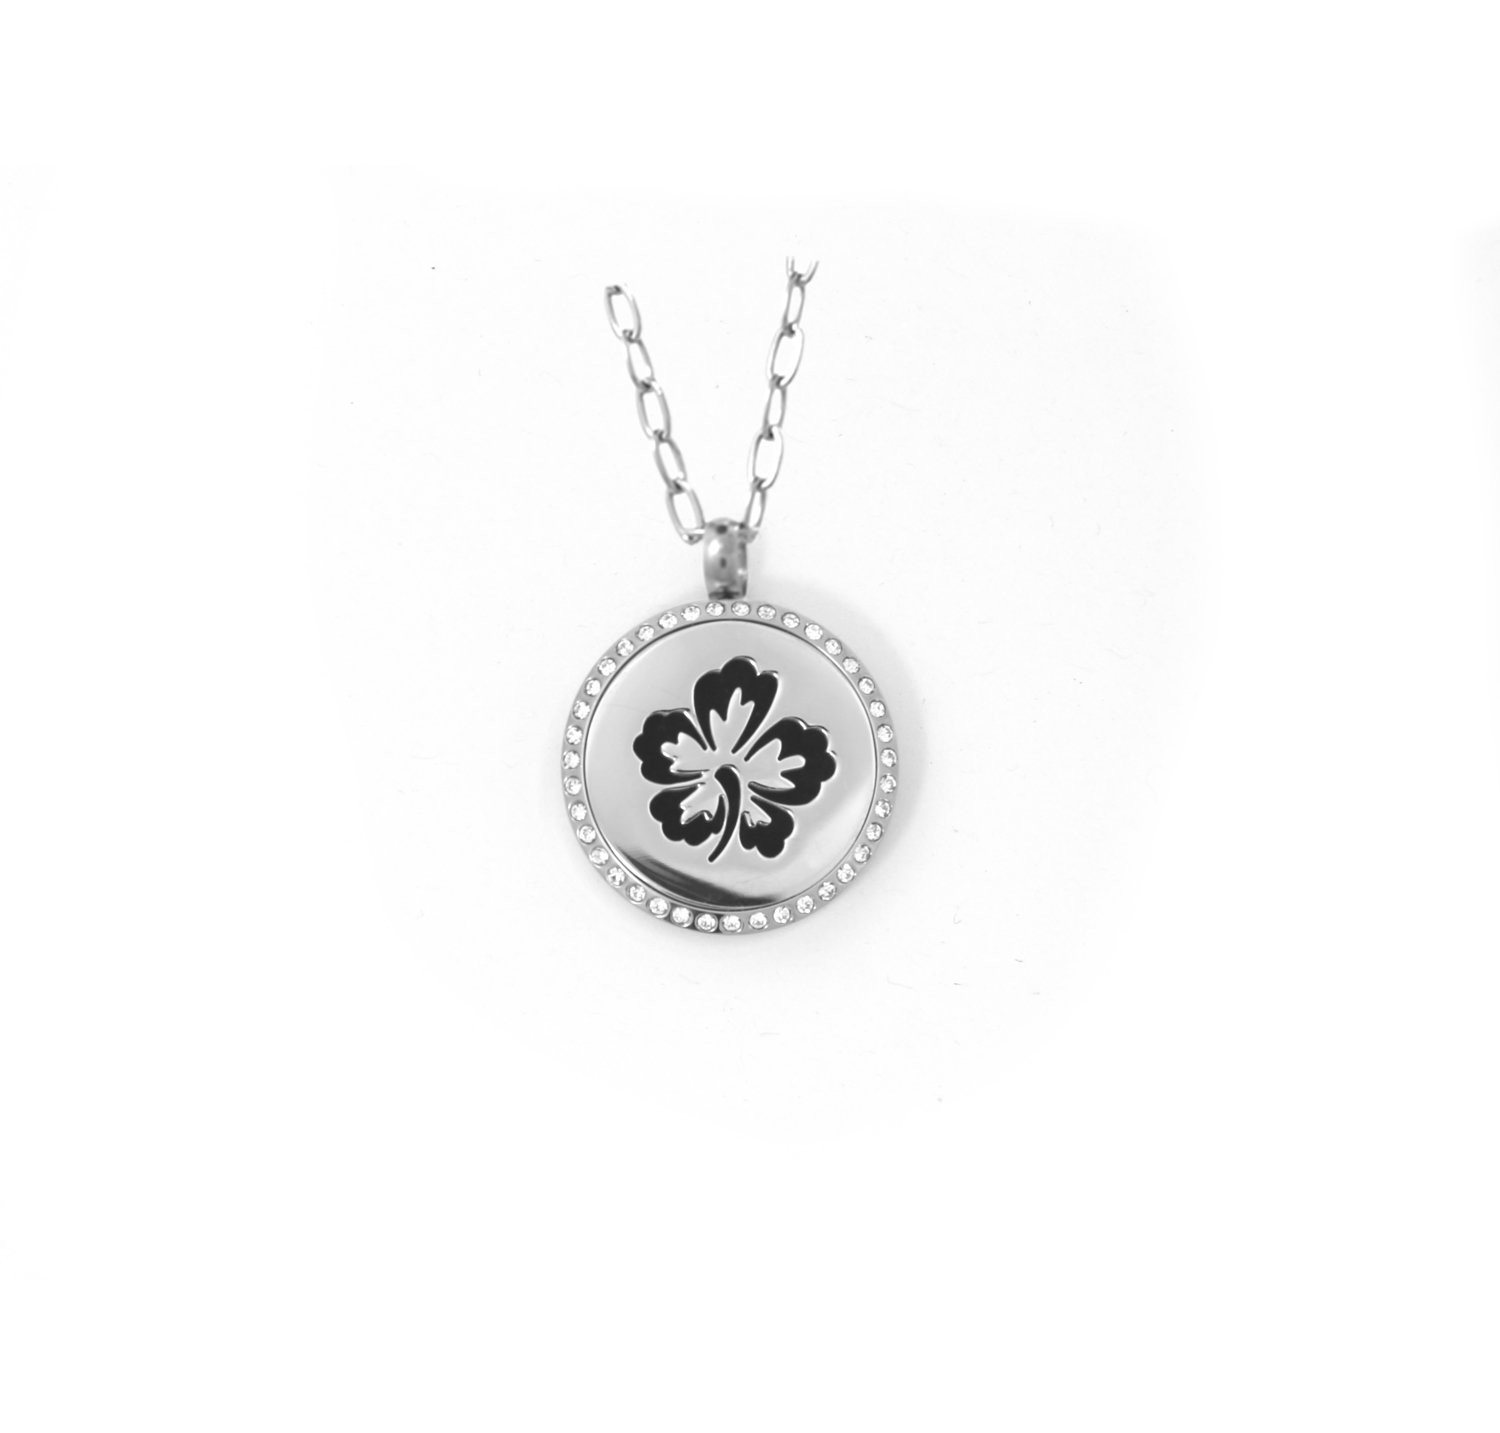 Diffusing Magnetic Hibiscus Pendant with Crystals - includes Two Leather Inserts